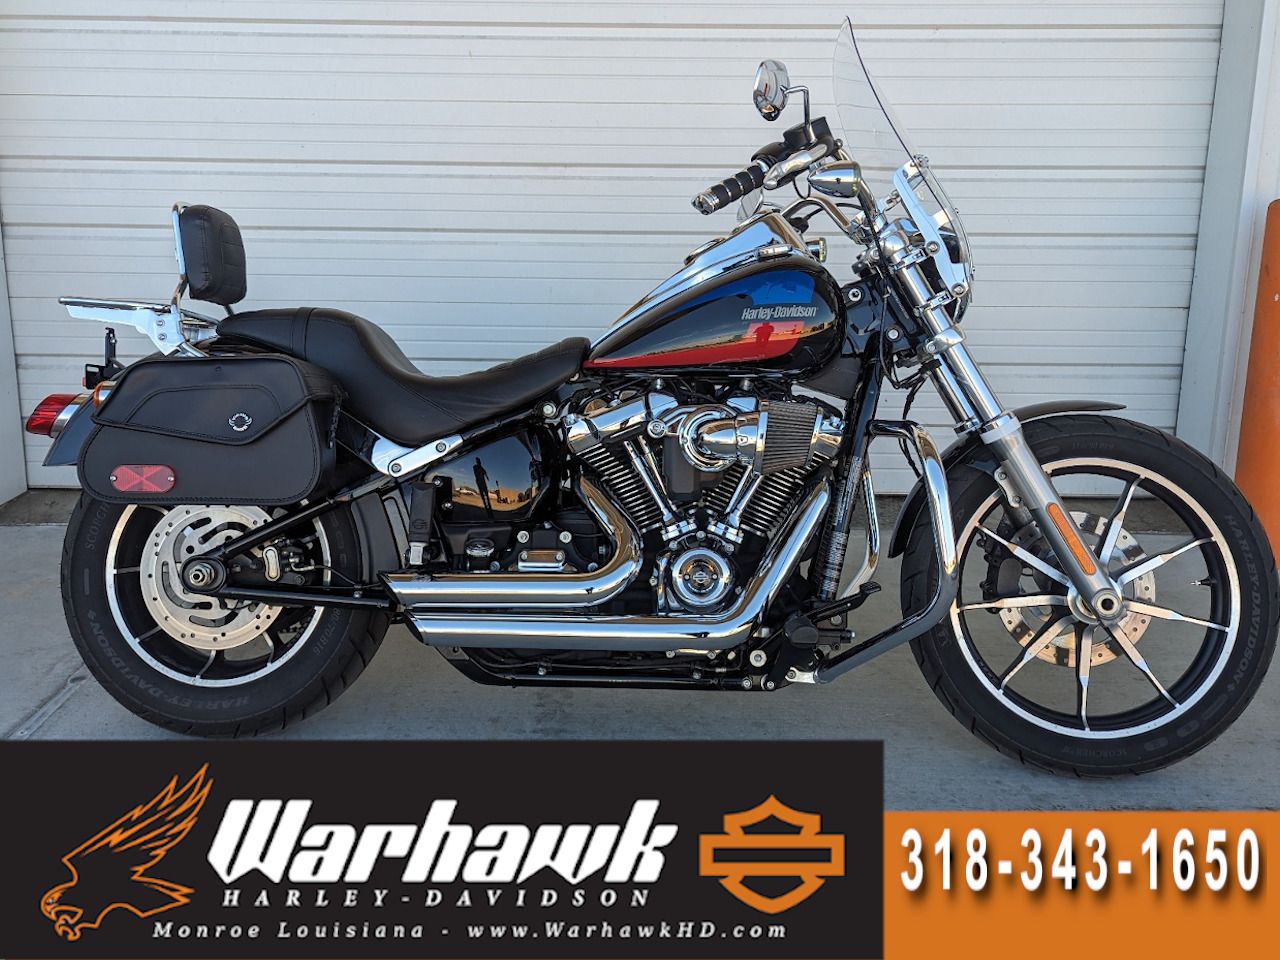 2018 harley davidson low rider 107 for sale near me - Photo 1